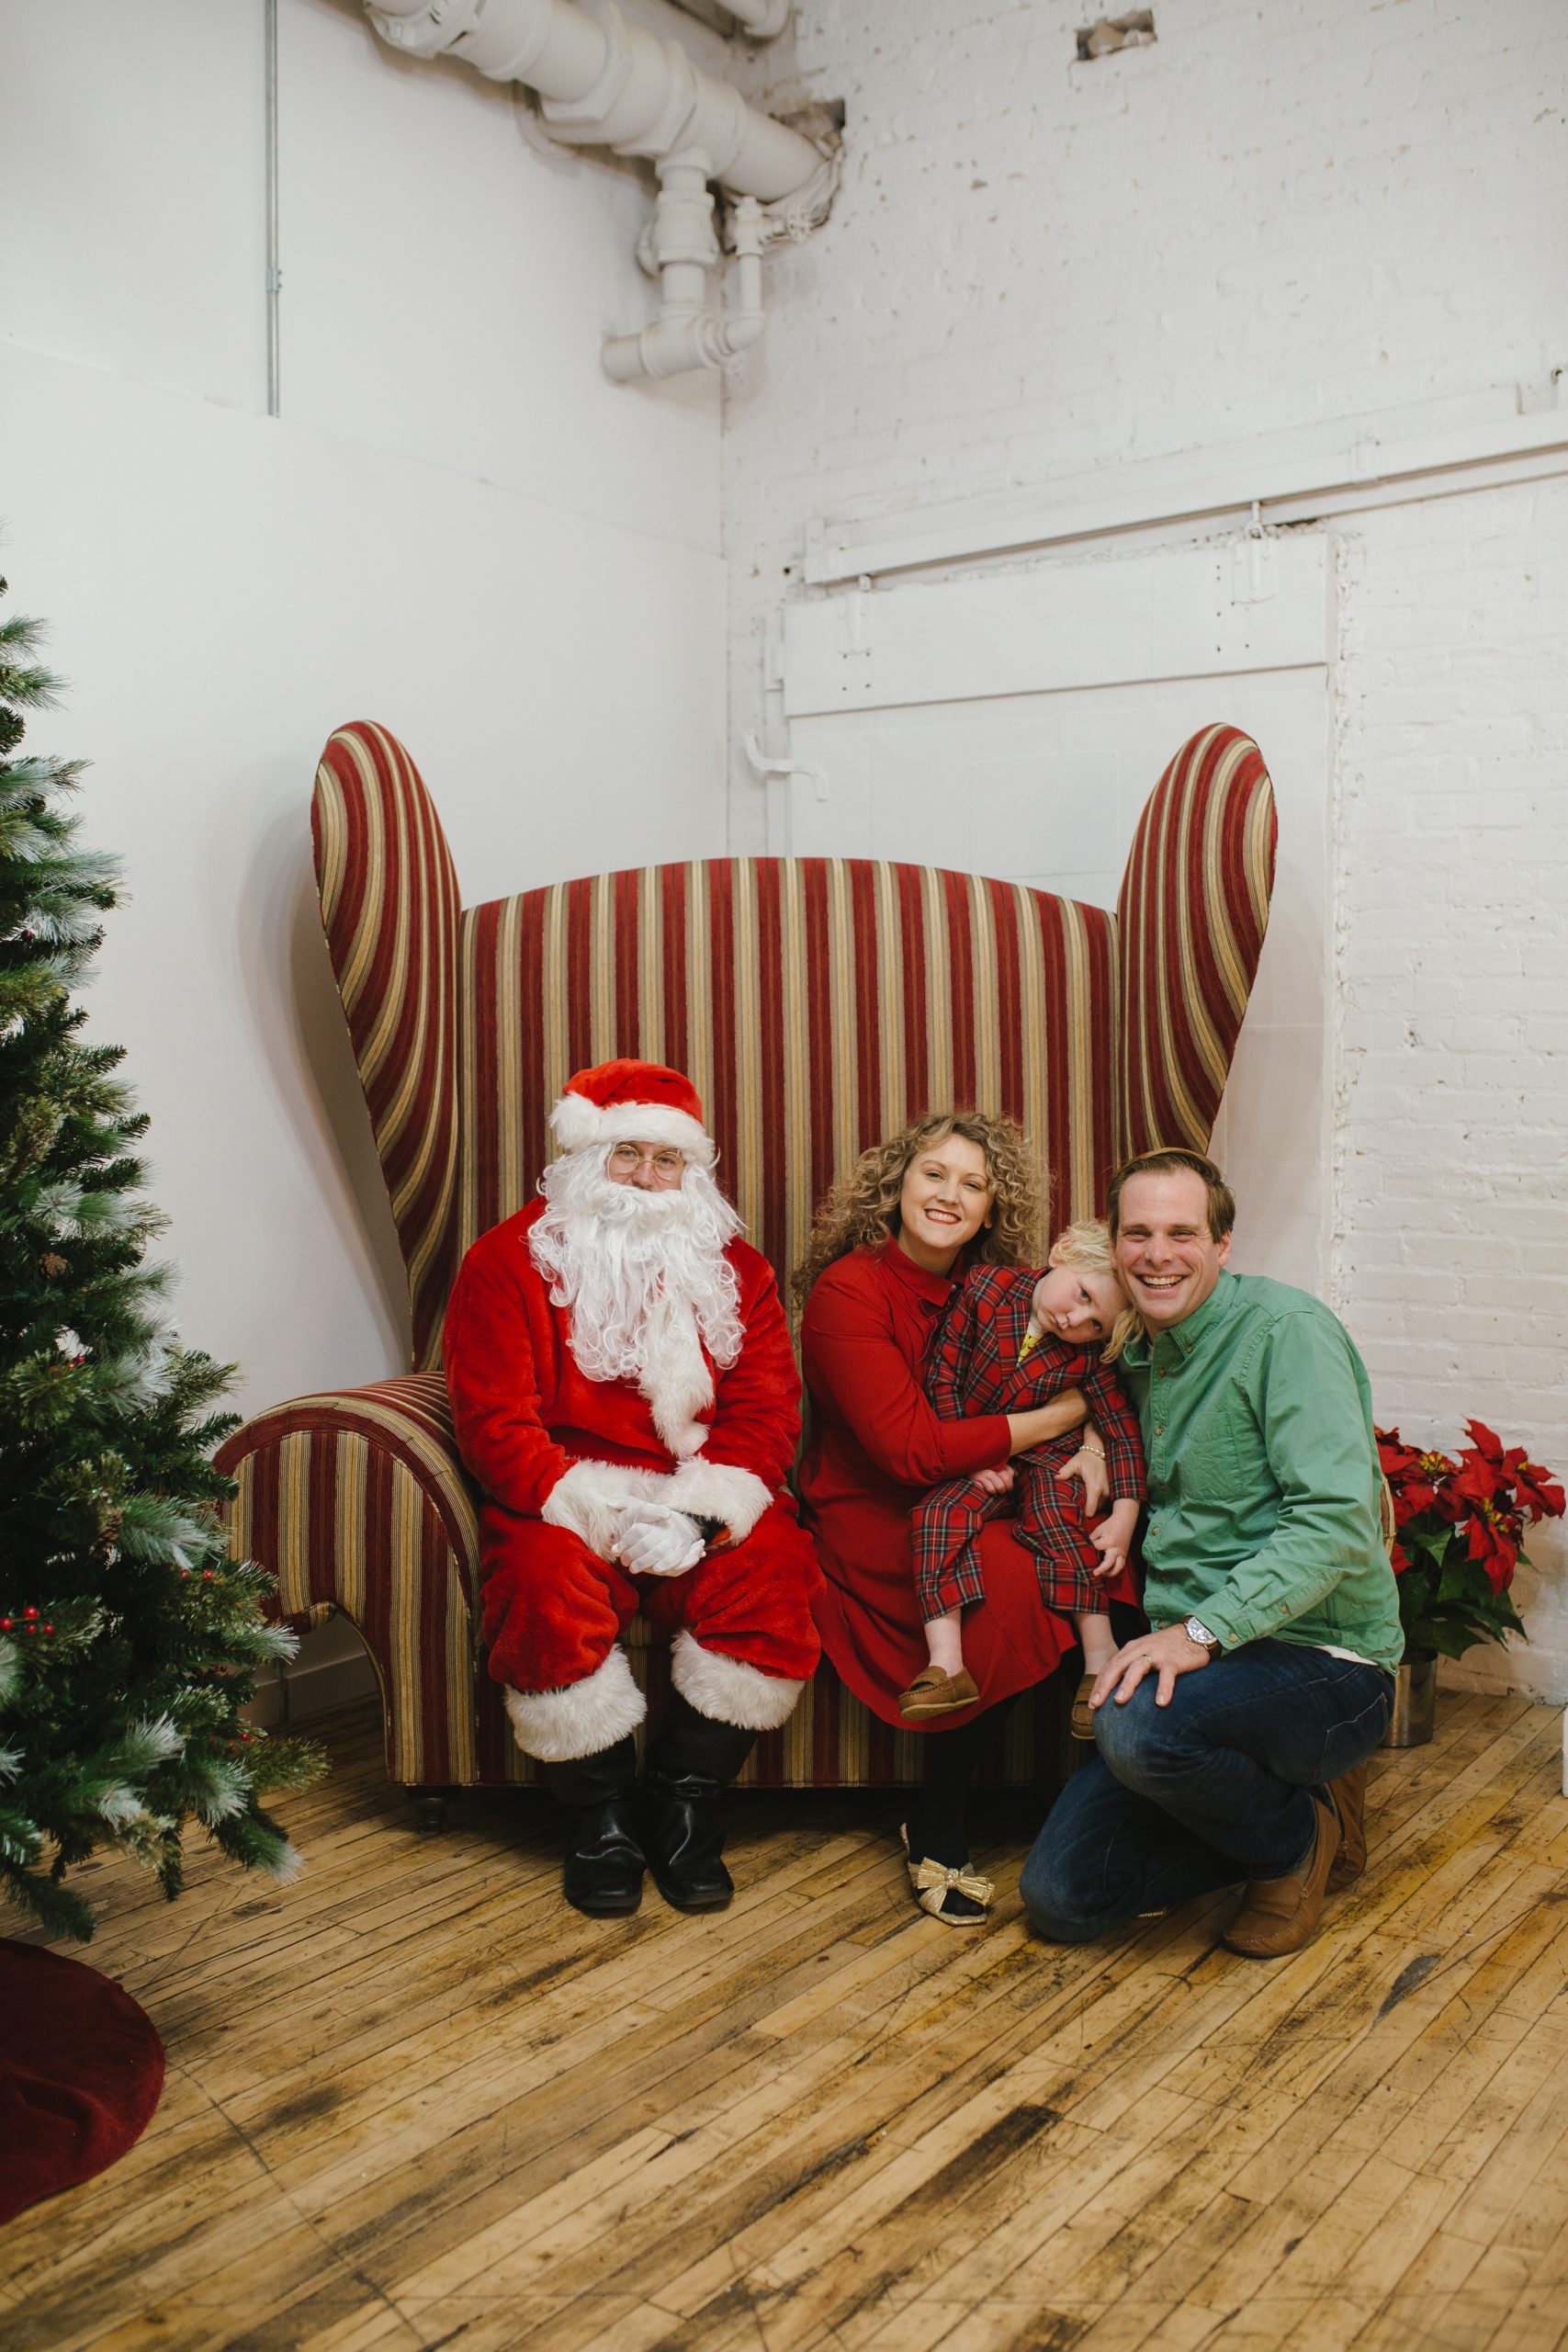 Ottos photos with santa went a bit different than expected